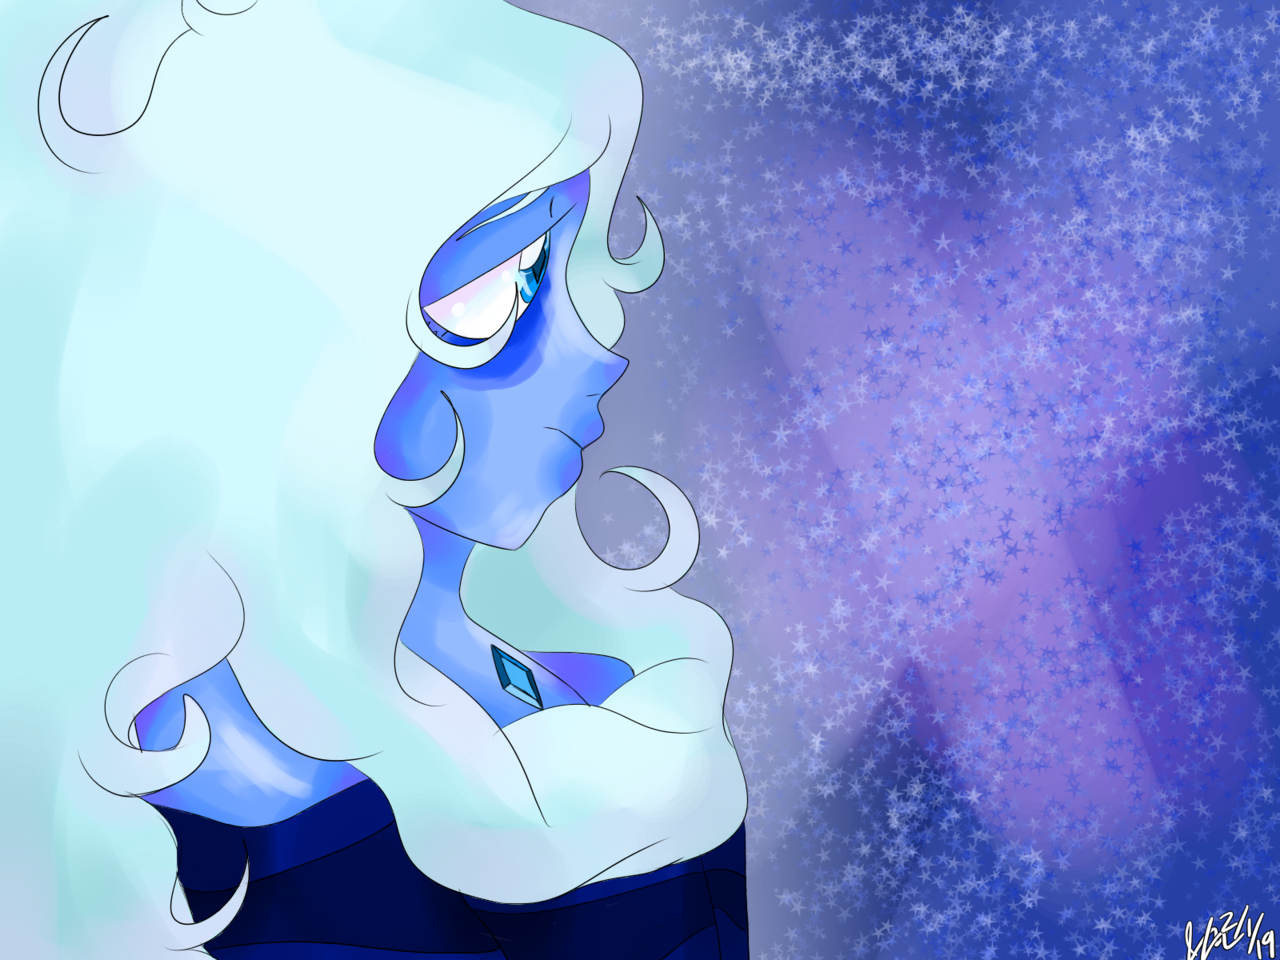 I love her. She’s one of my SU favorite characters